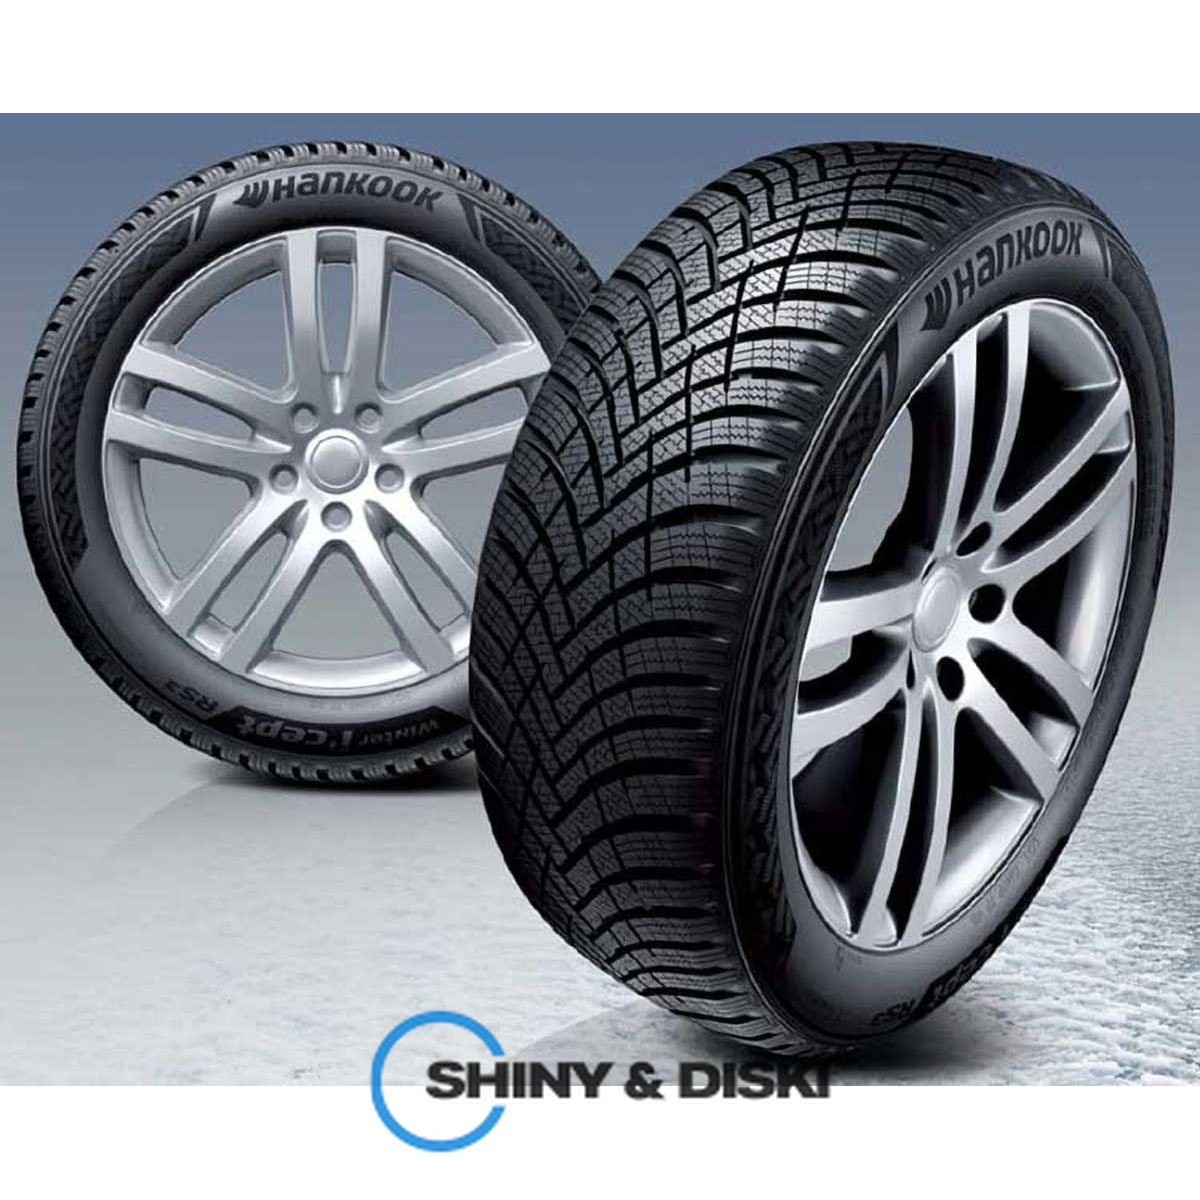 покрышки hankook winter i*cept rs3 w462 165/65 r15 81t